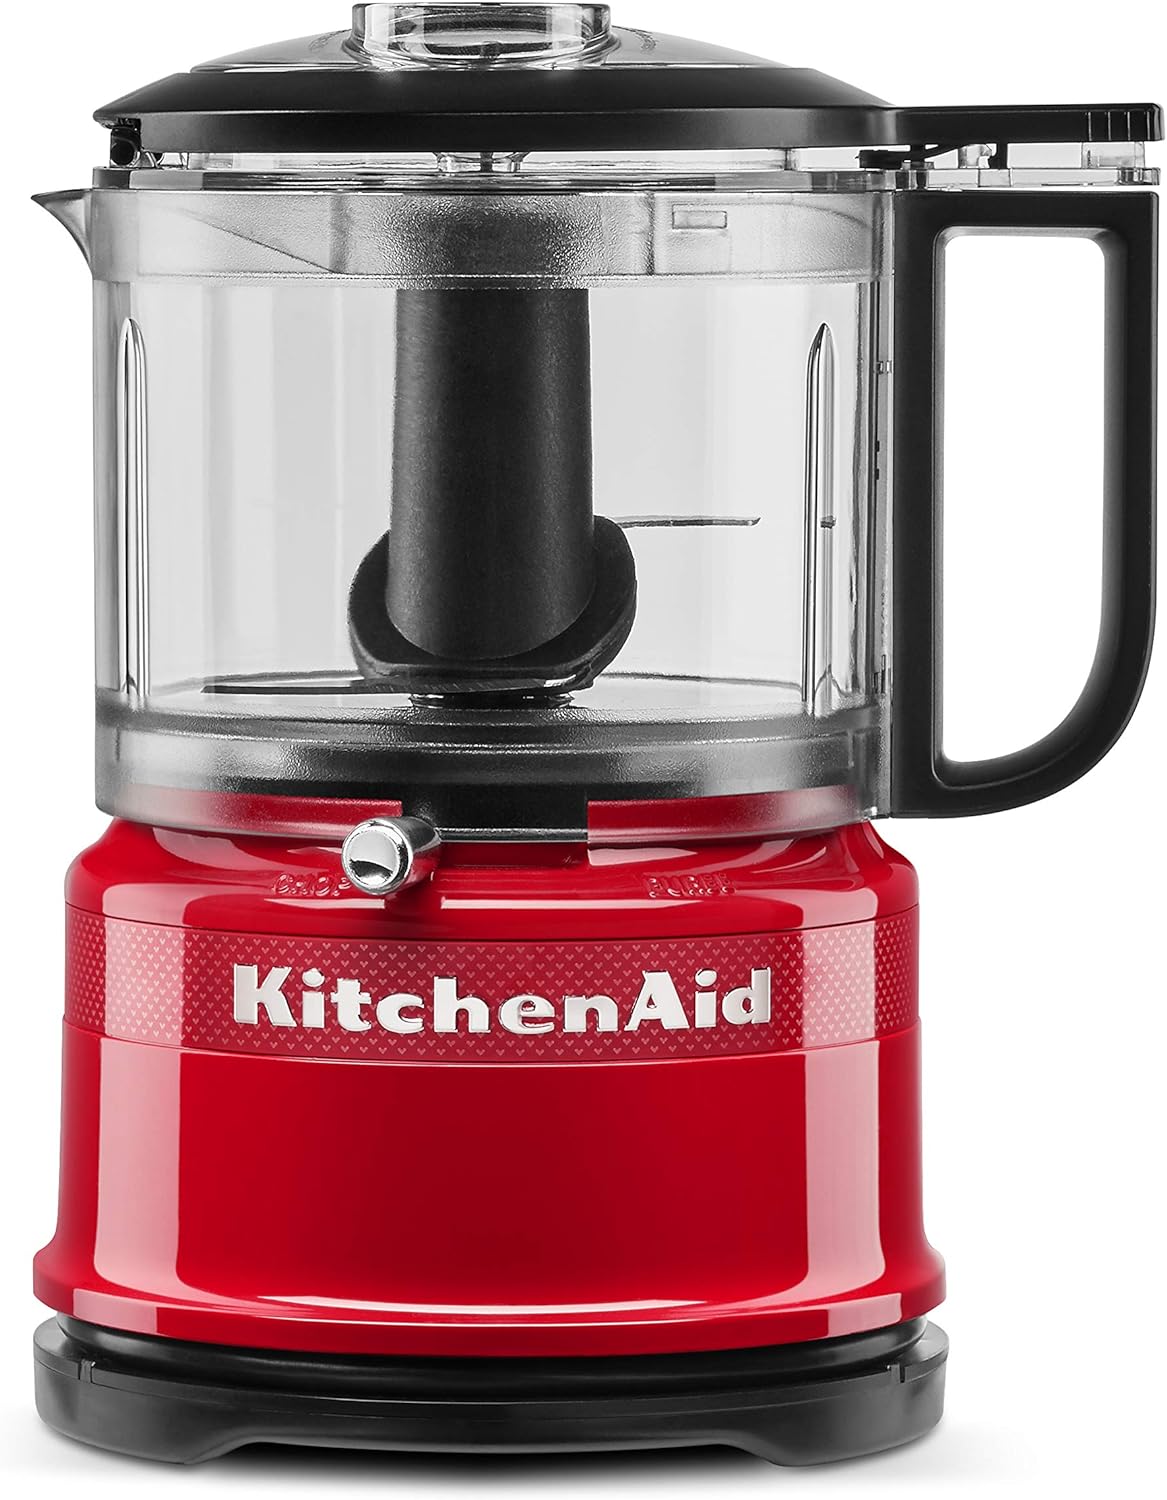 KitchenAid KFC3516QHSD 100 Years Limited Edition Queen of Hearts Food Chopper 3.5 Cup Passion Red